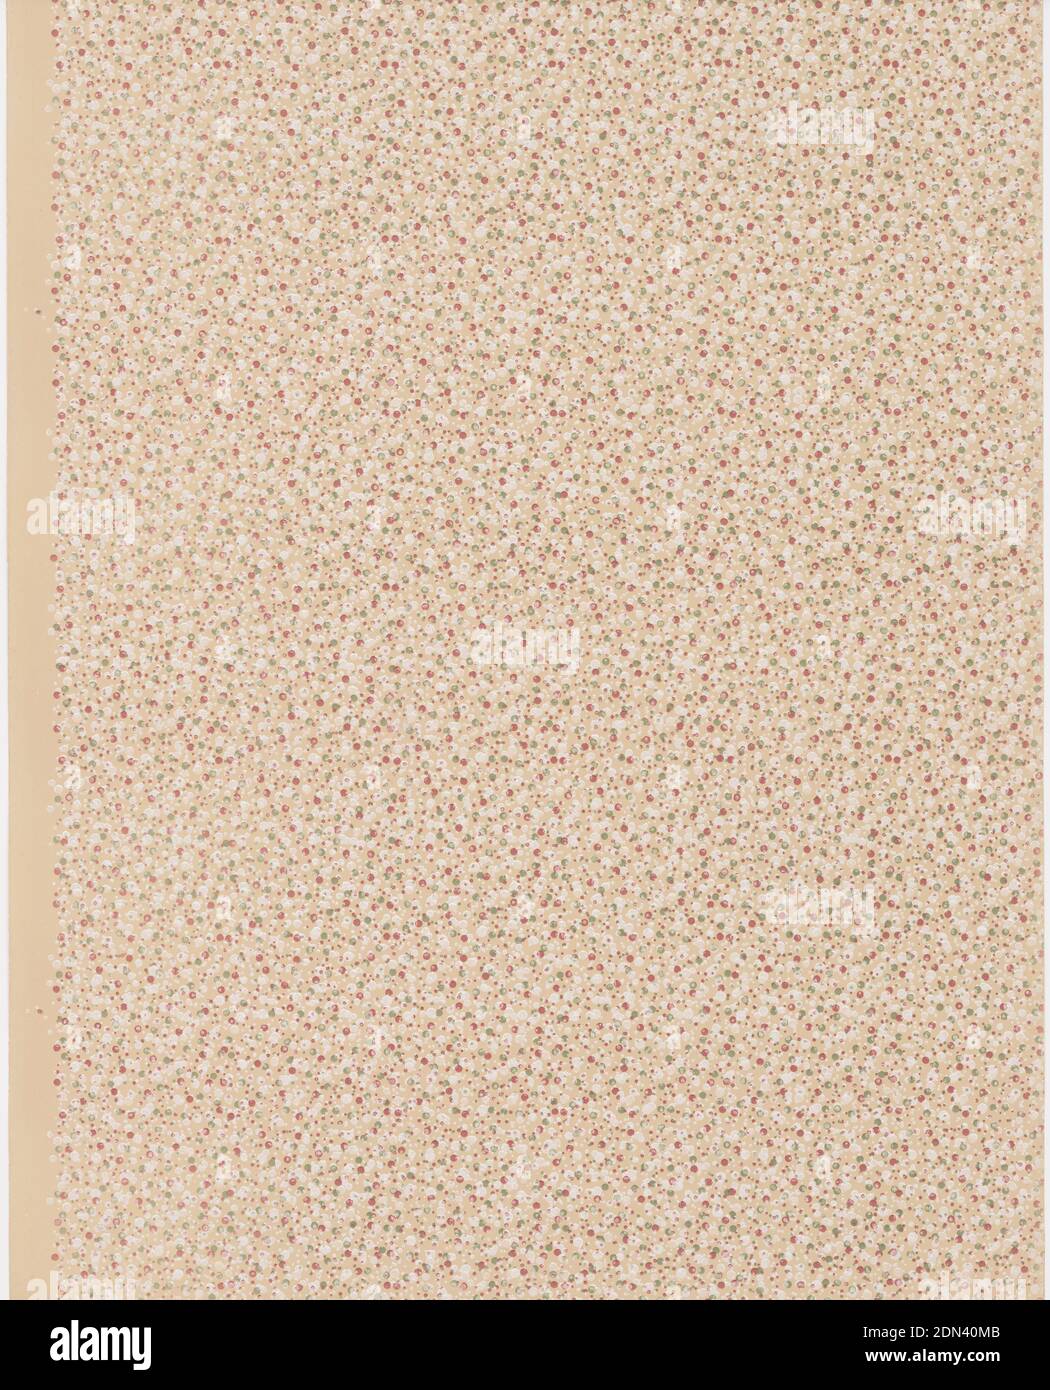 Sidewall, Machine-printed paper, On light brown ground, overlapping dots in red, green, and white., USA, 1905–1915, Wallcoverings, Sidewall Stock Photo